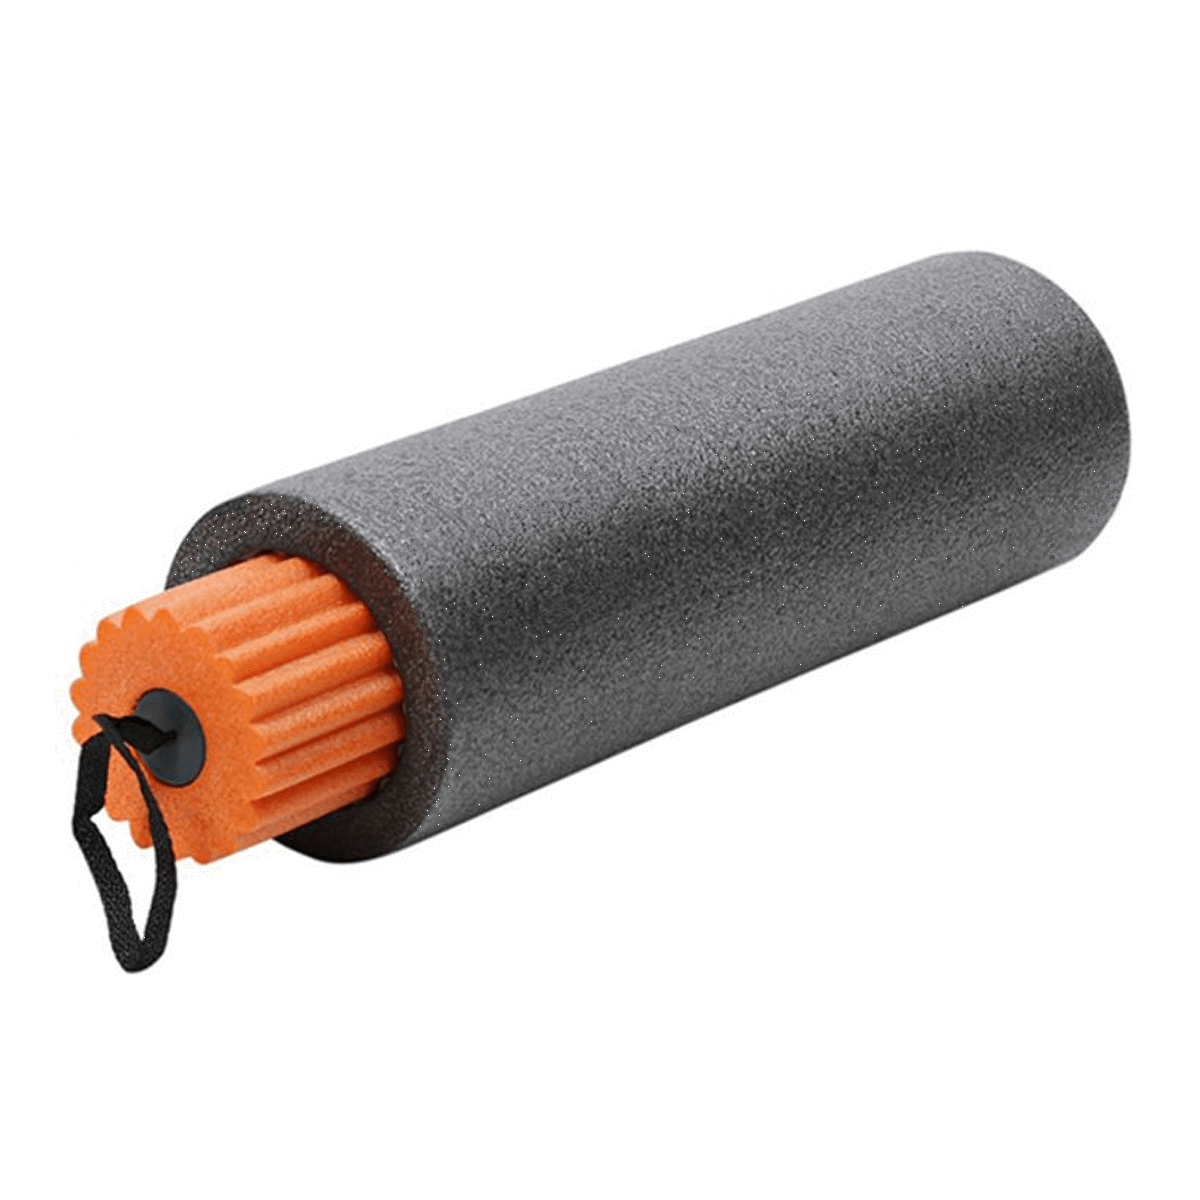 Liveup Sports 3-In-1 Yoga Roller Set